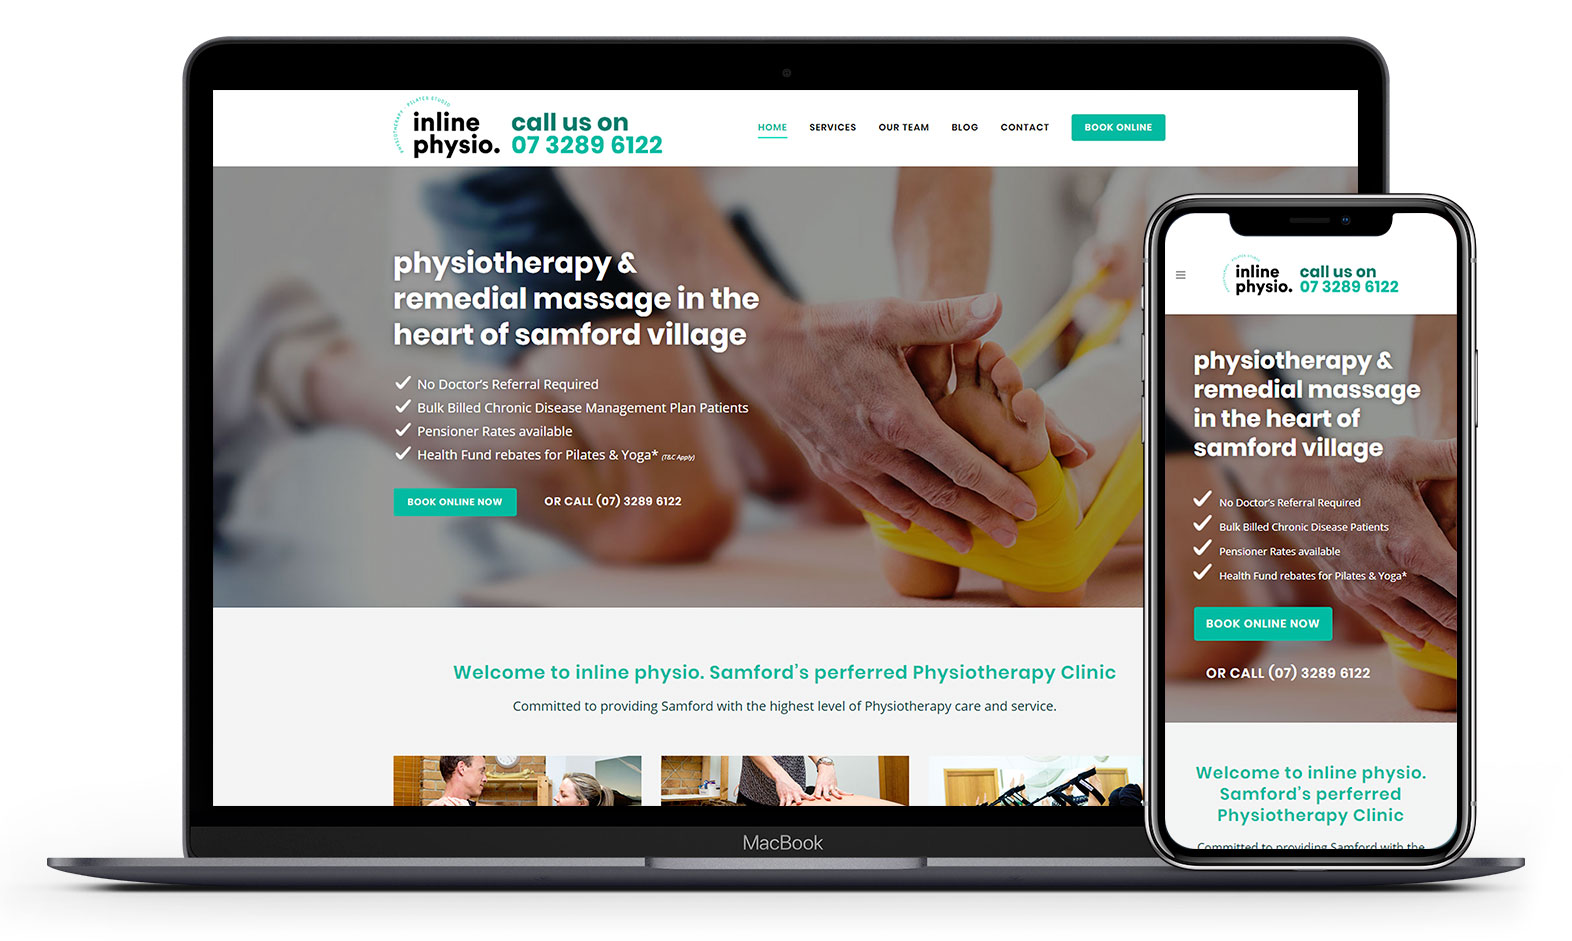 Inline physio's website design displayed responsive devices